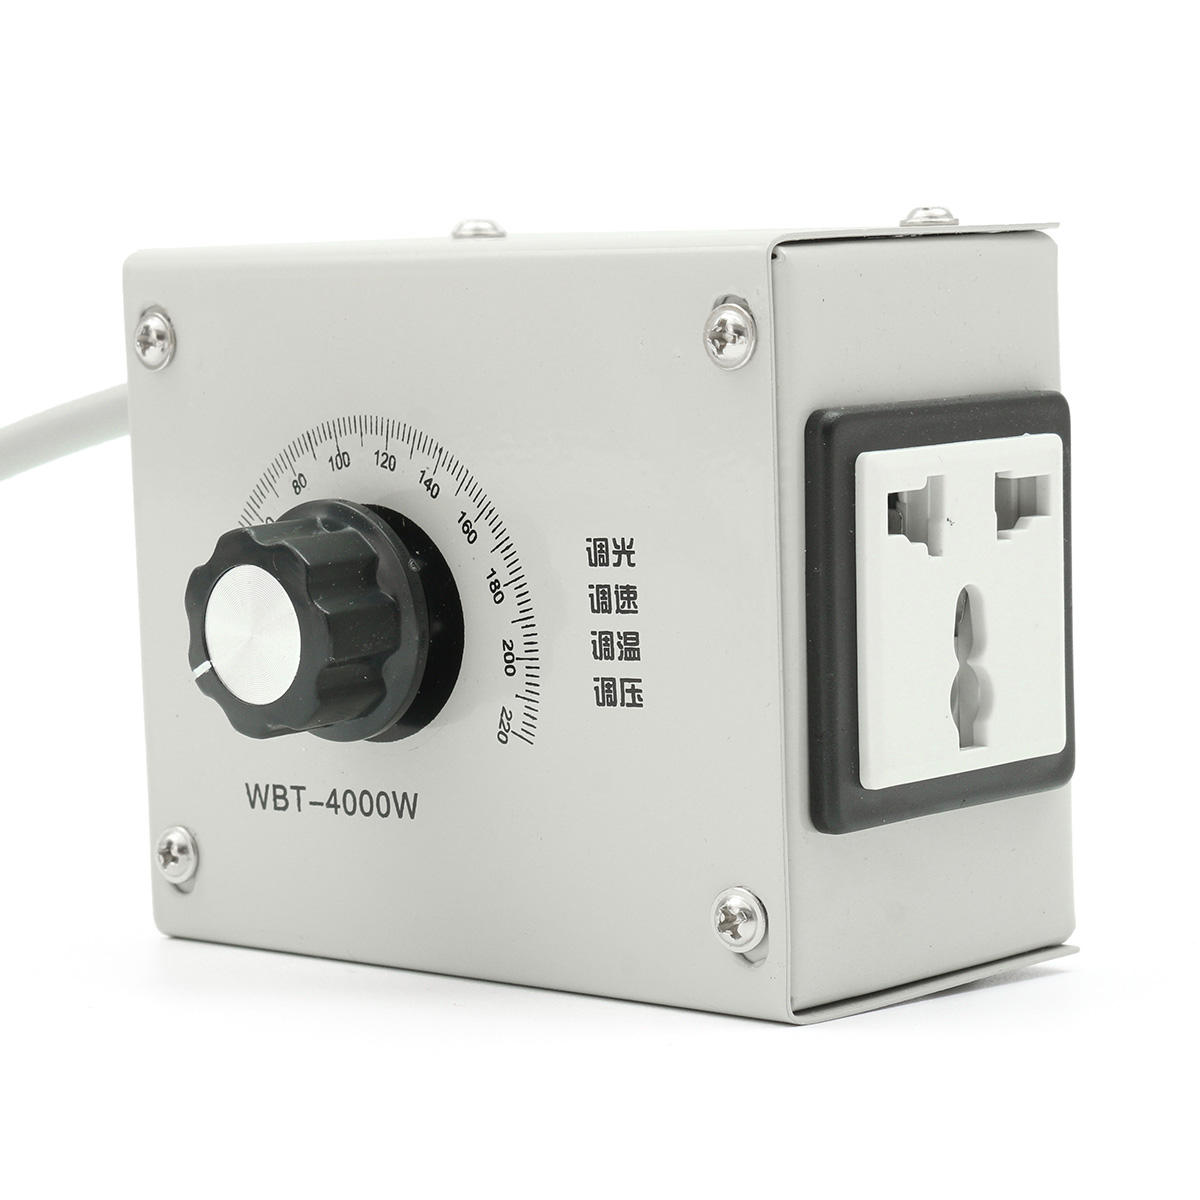 best price,4000w,ac,220v,variable,voltage,controller,eu,discount